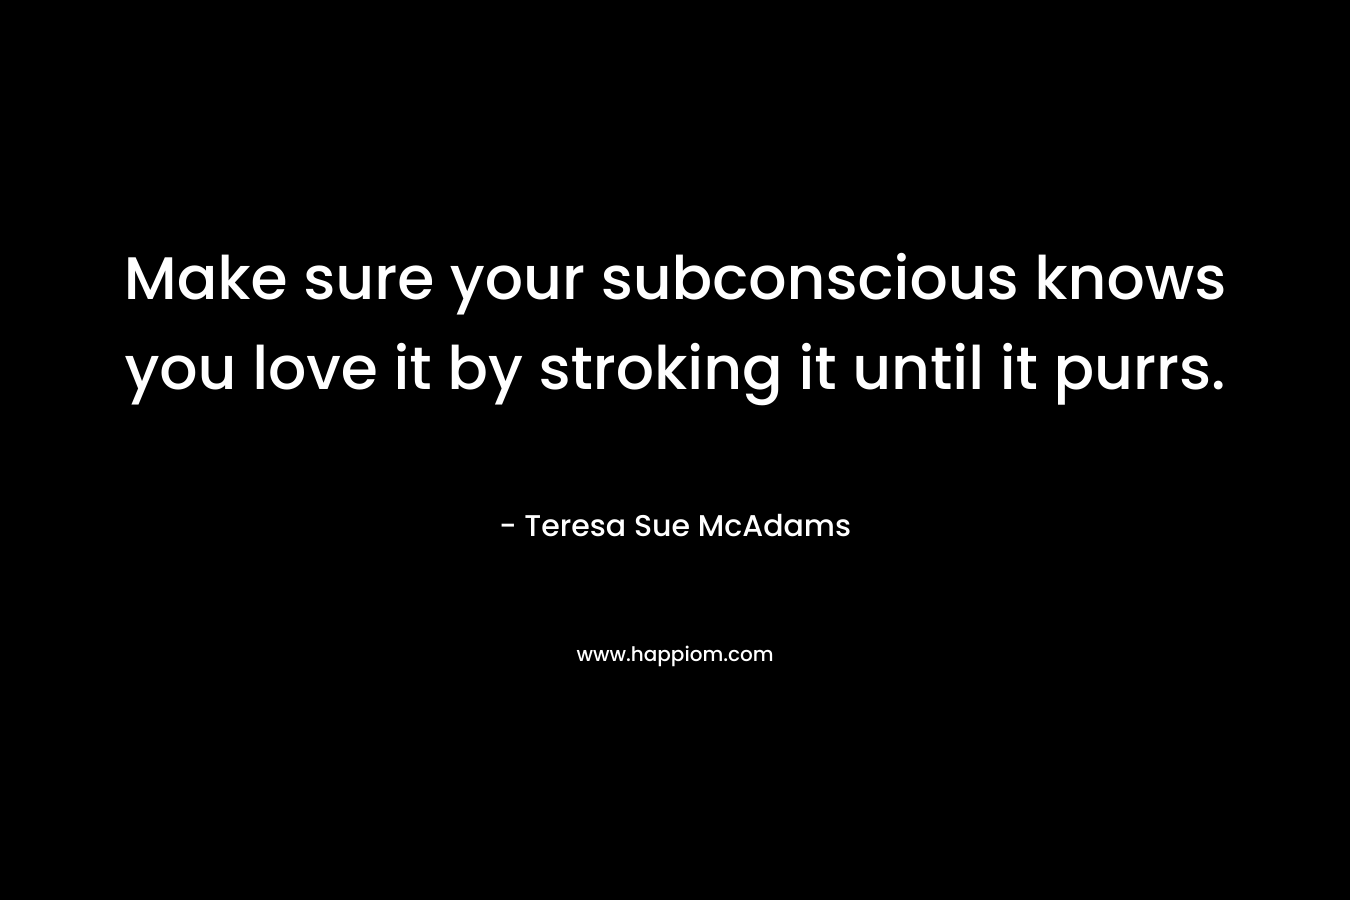 Make sure your subconscious knows you love it by stroking it until it purrs. – Teresa Sue McAdams